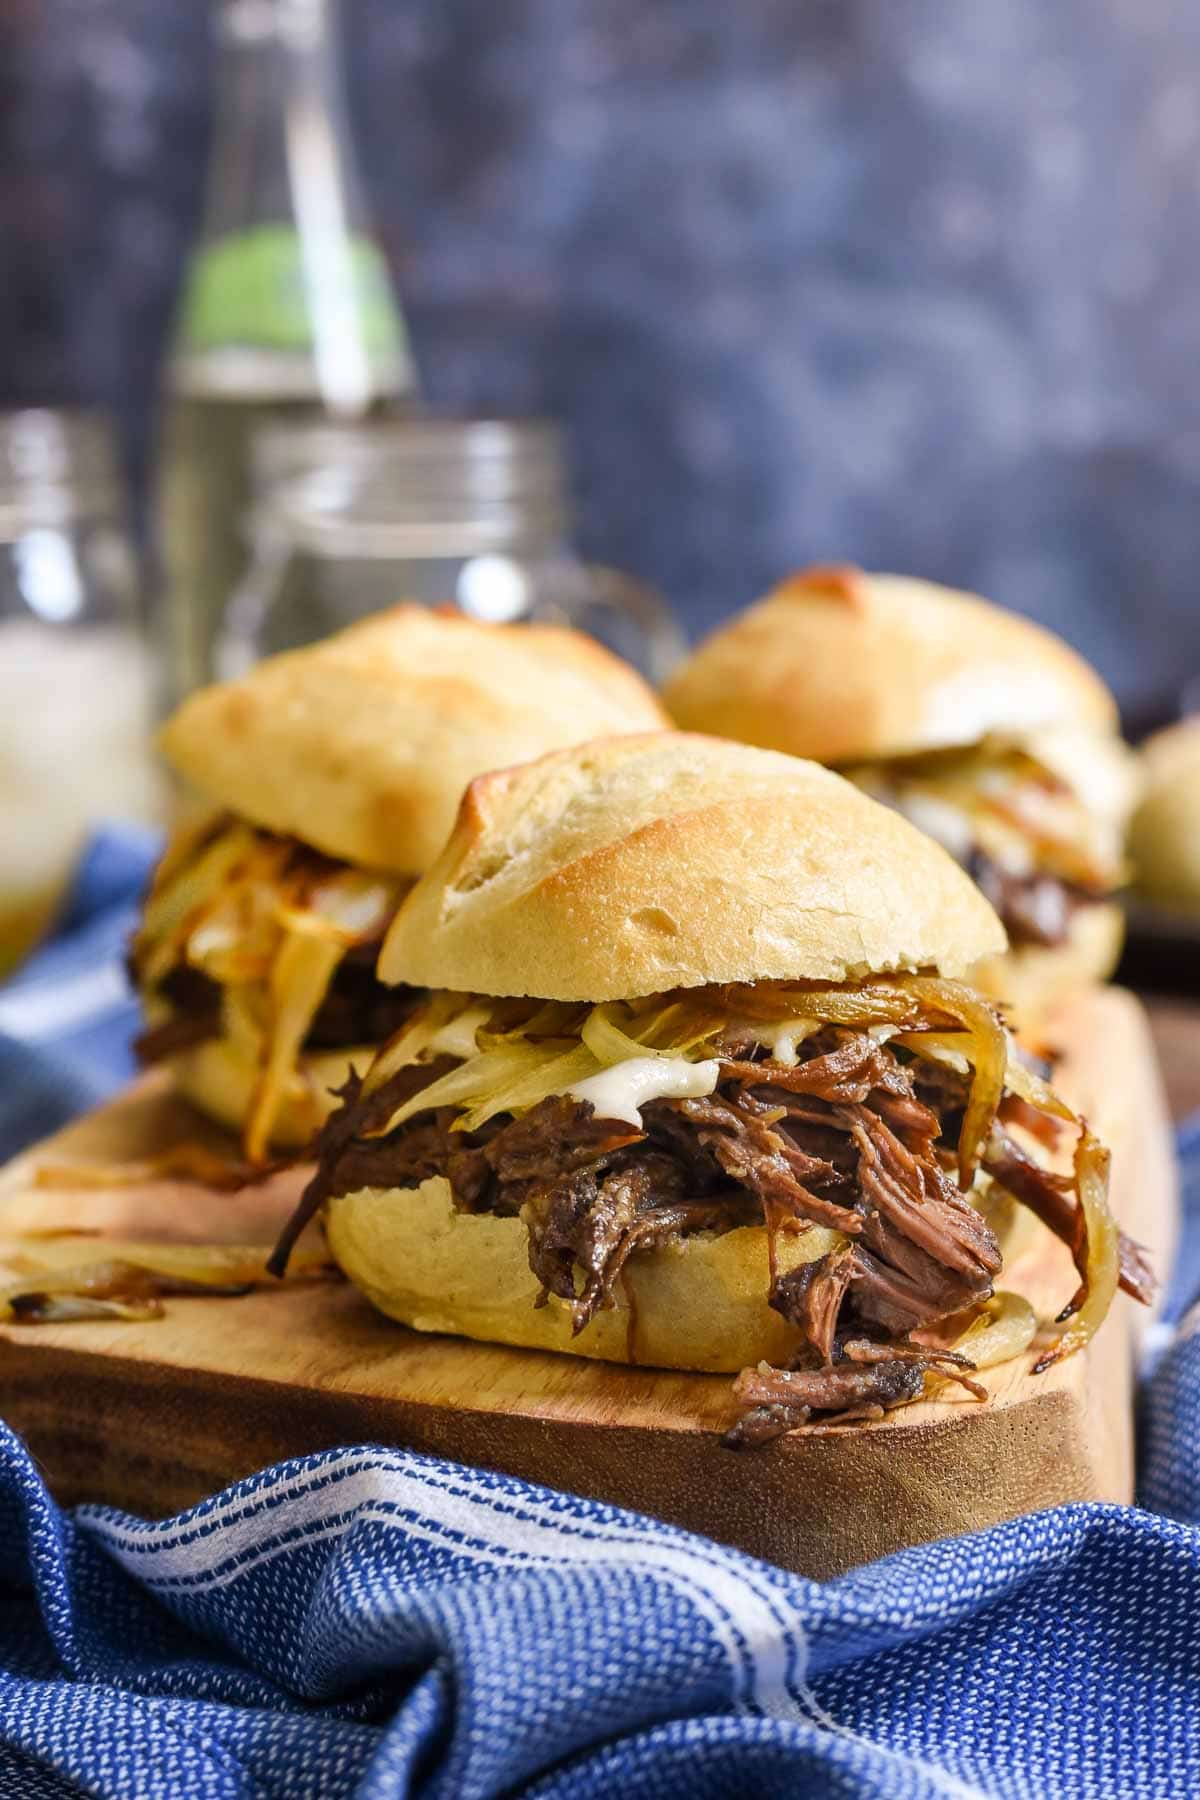 Put all that savory leftover roast beef to good use with these Leftover Pot Roast Sandwiches loaded with caramelized onions and melty Swiss cheese!